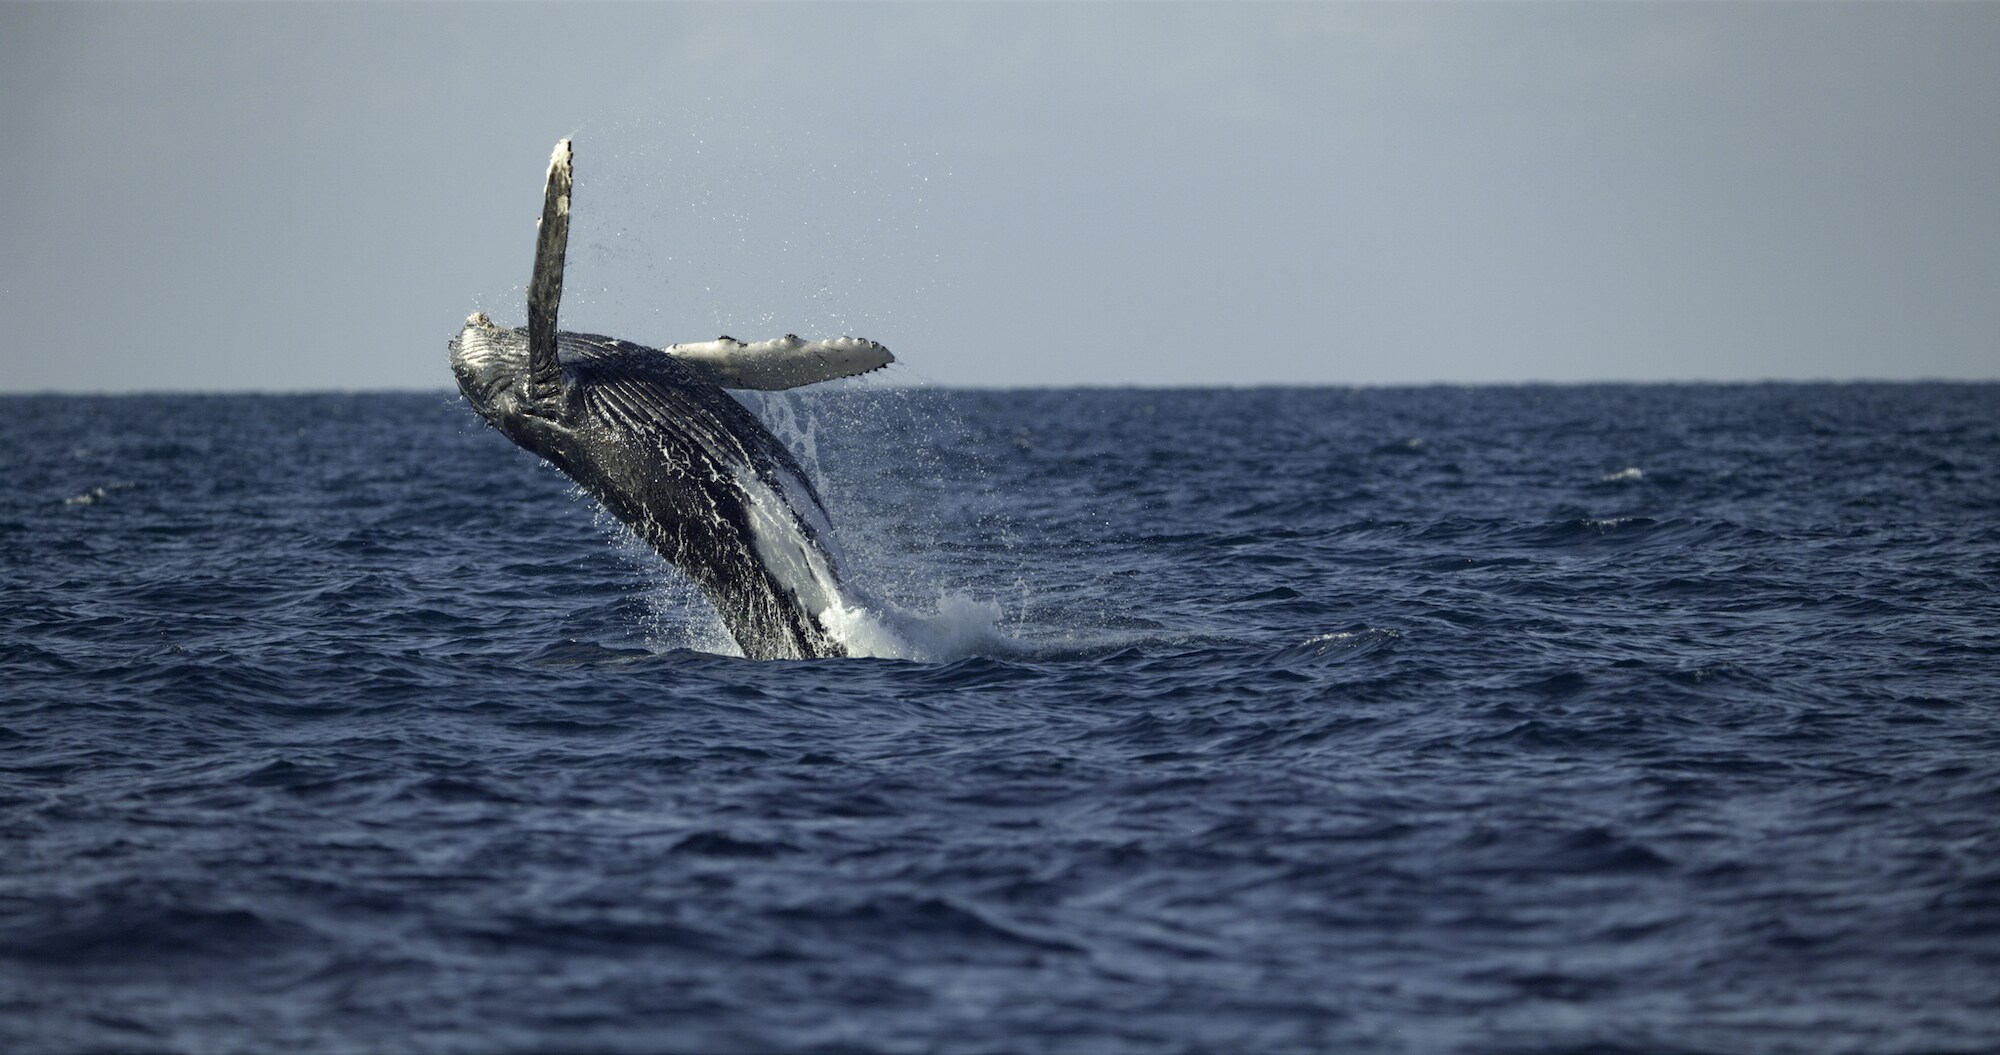 Beyond the blubber: Whales show rich personalities